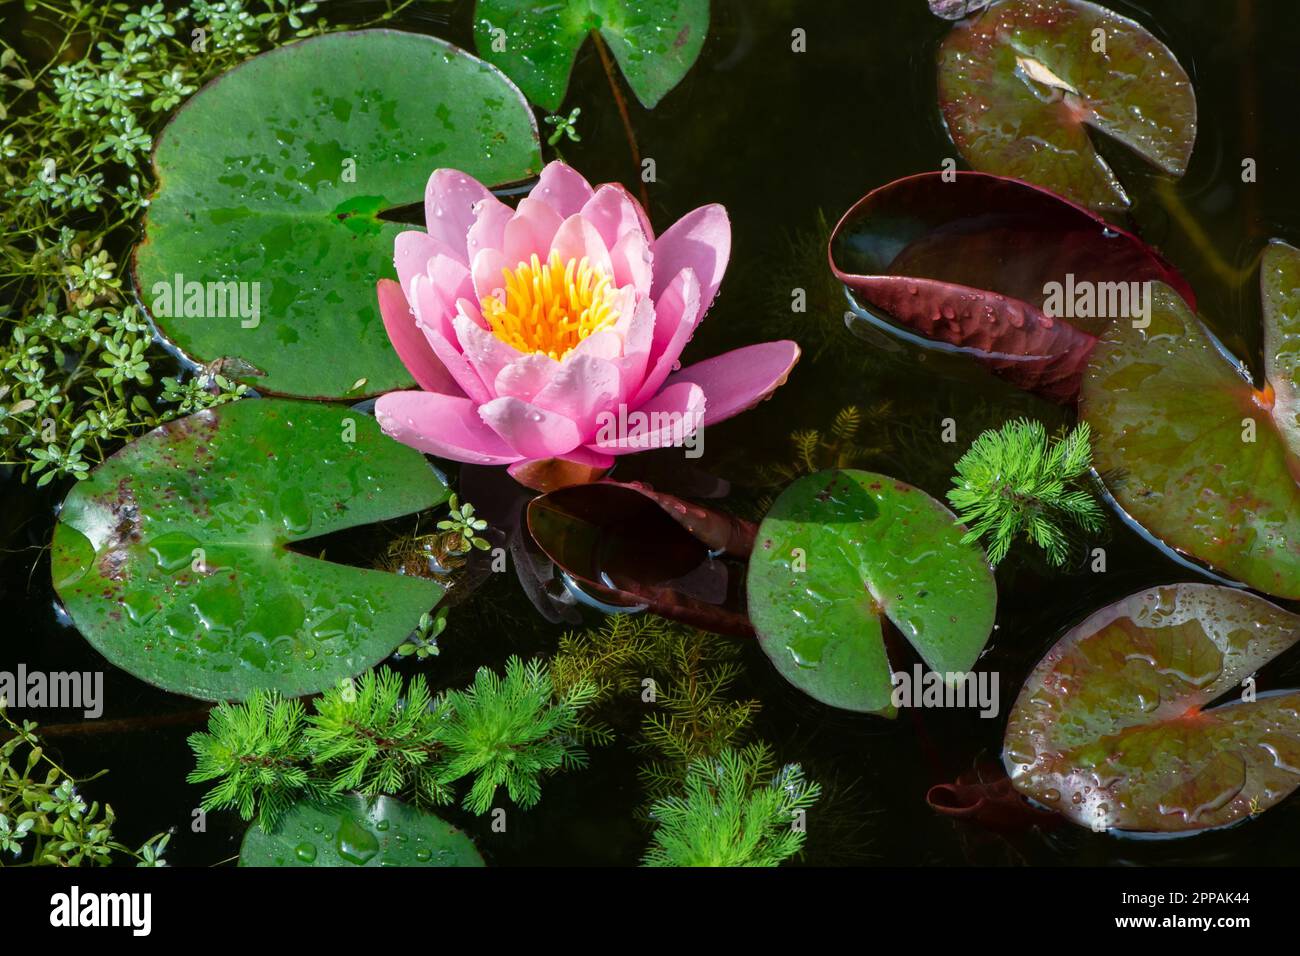 Water lilly and other aquatic plants like watermilfoil and water-starwort in a pond Stock Photo